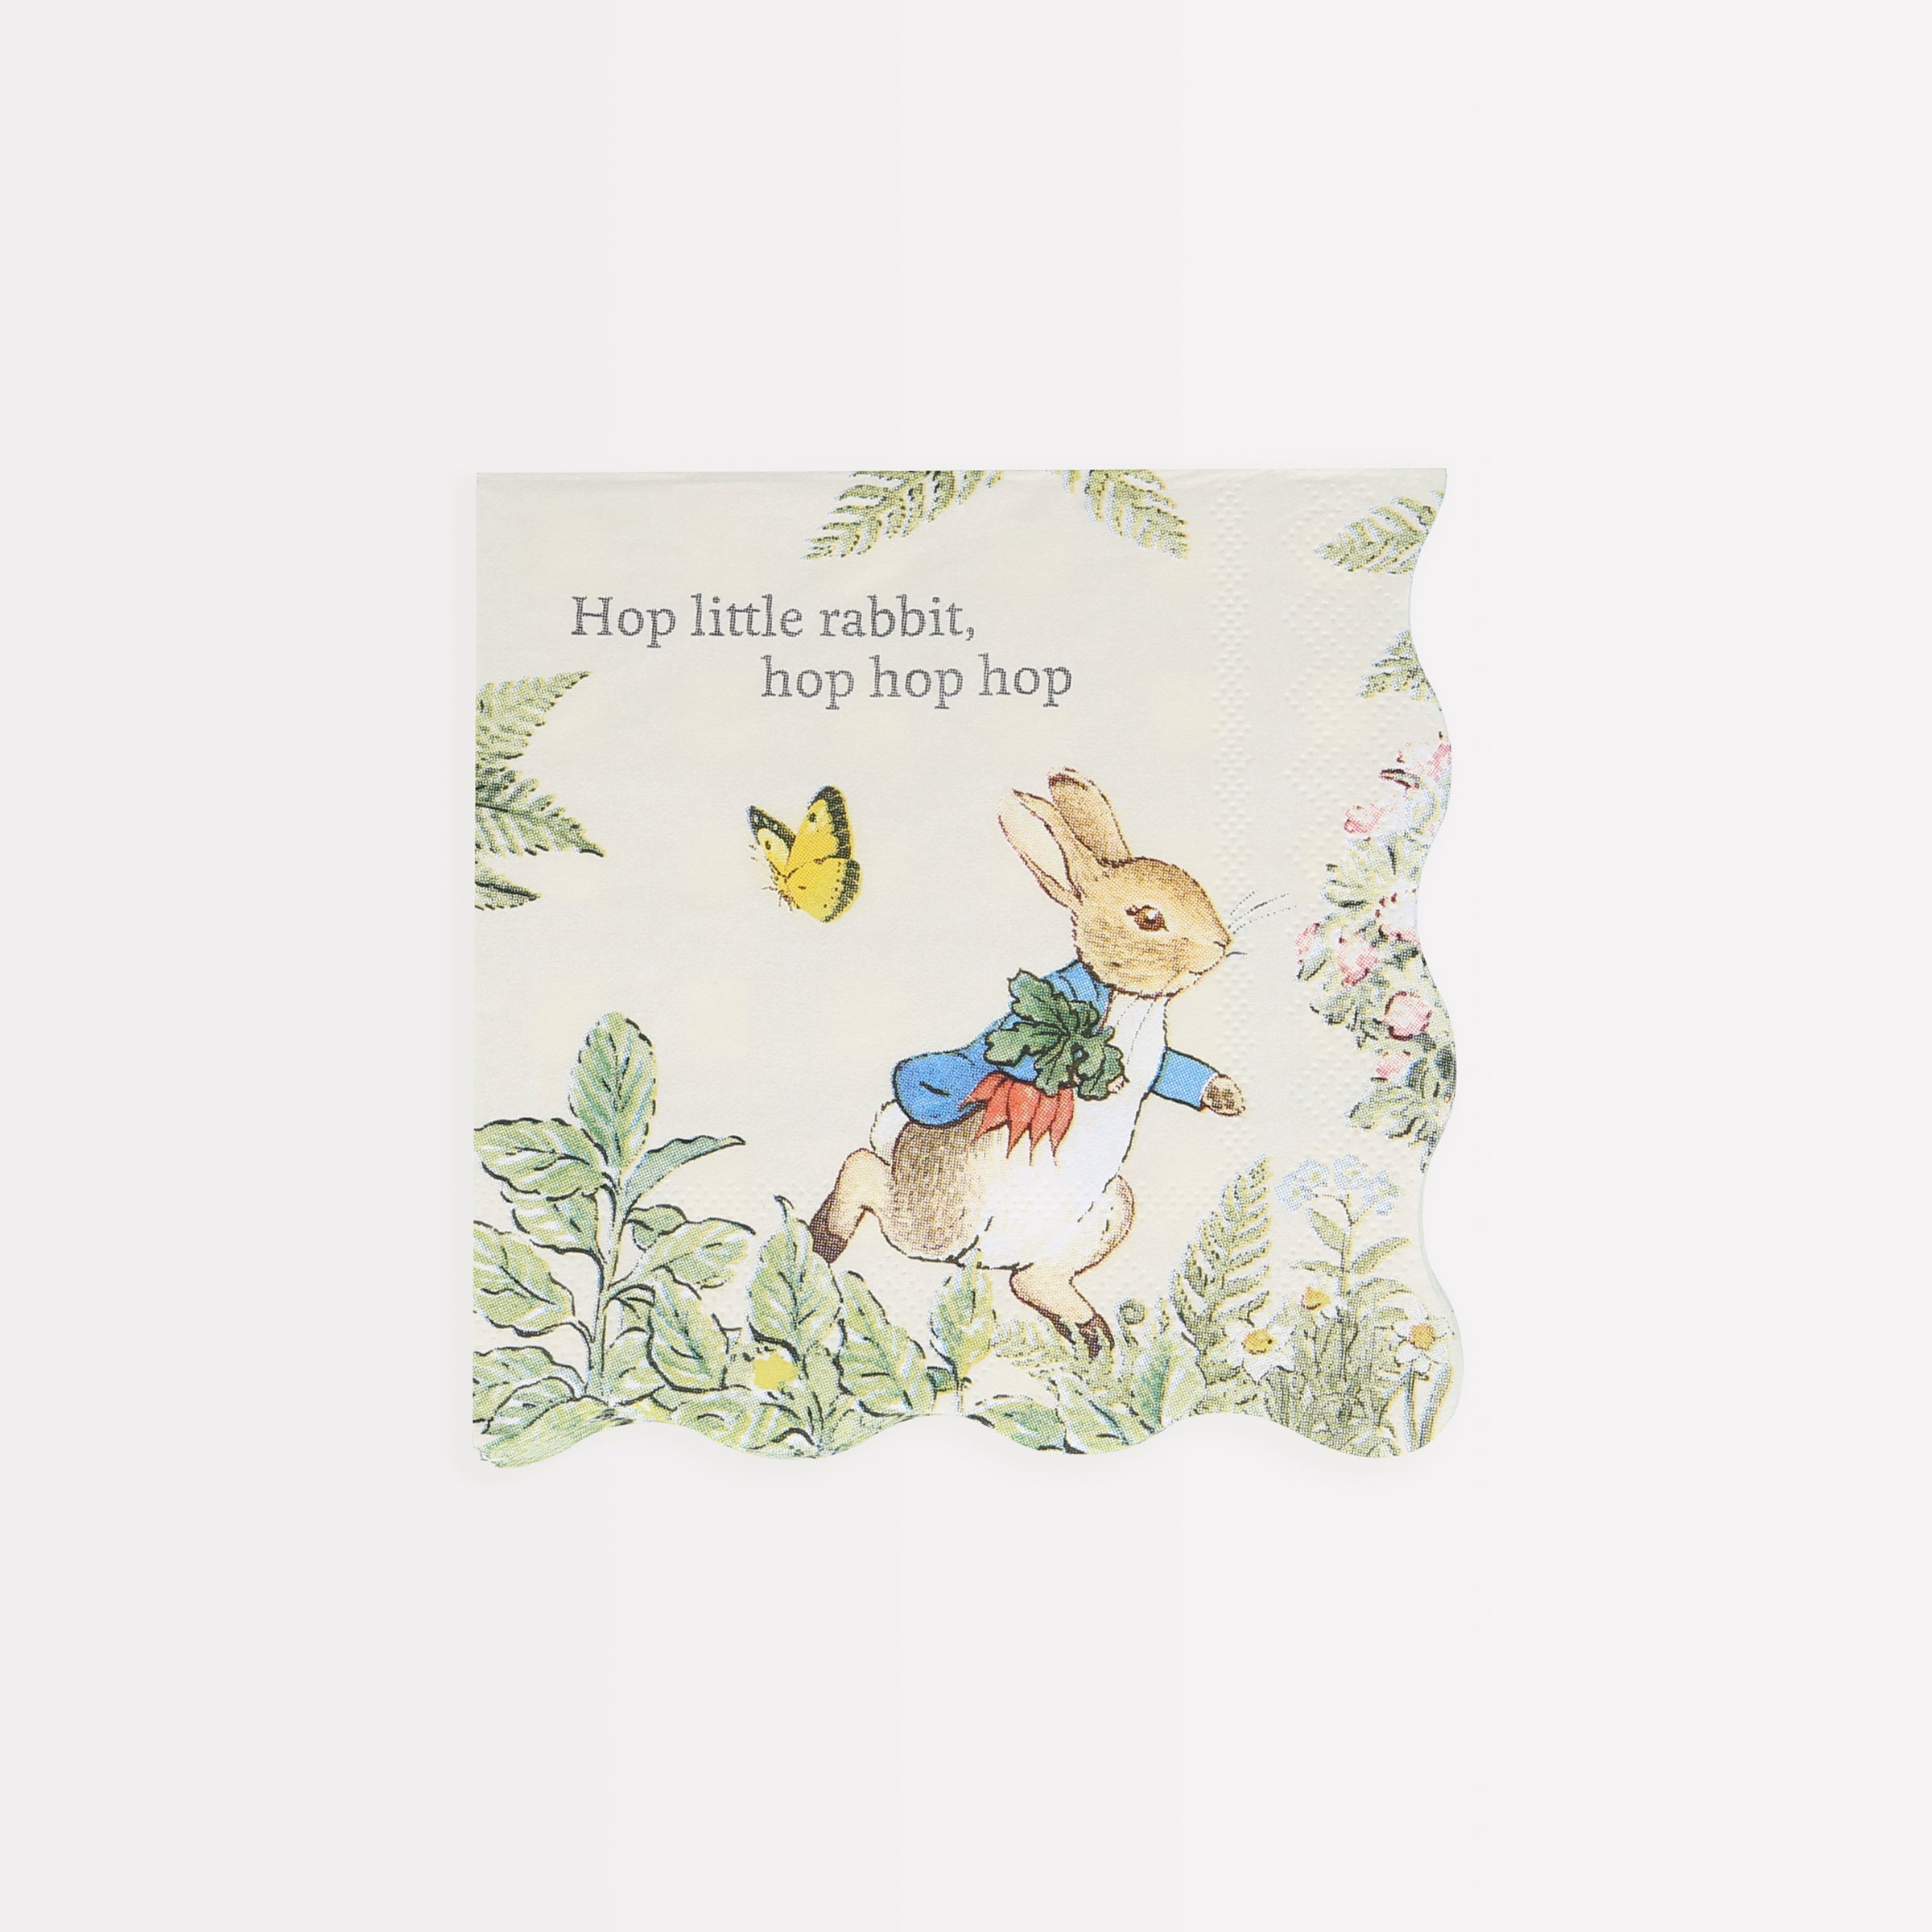 These napkins are perfect as Easter napkins or for a Peter Rabbit party.